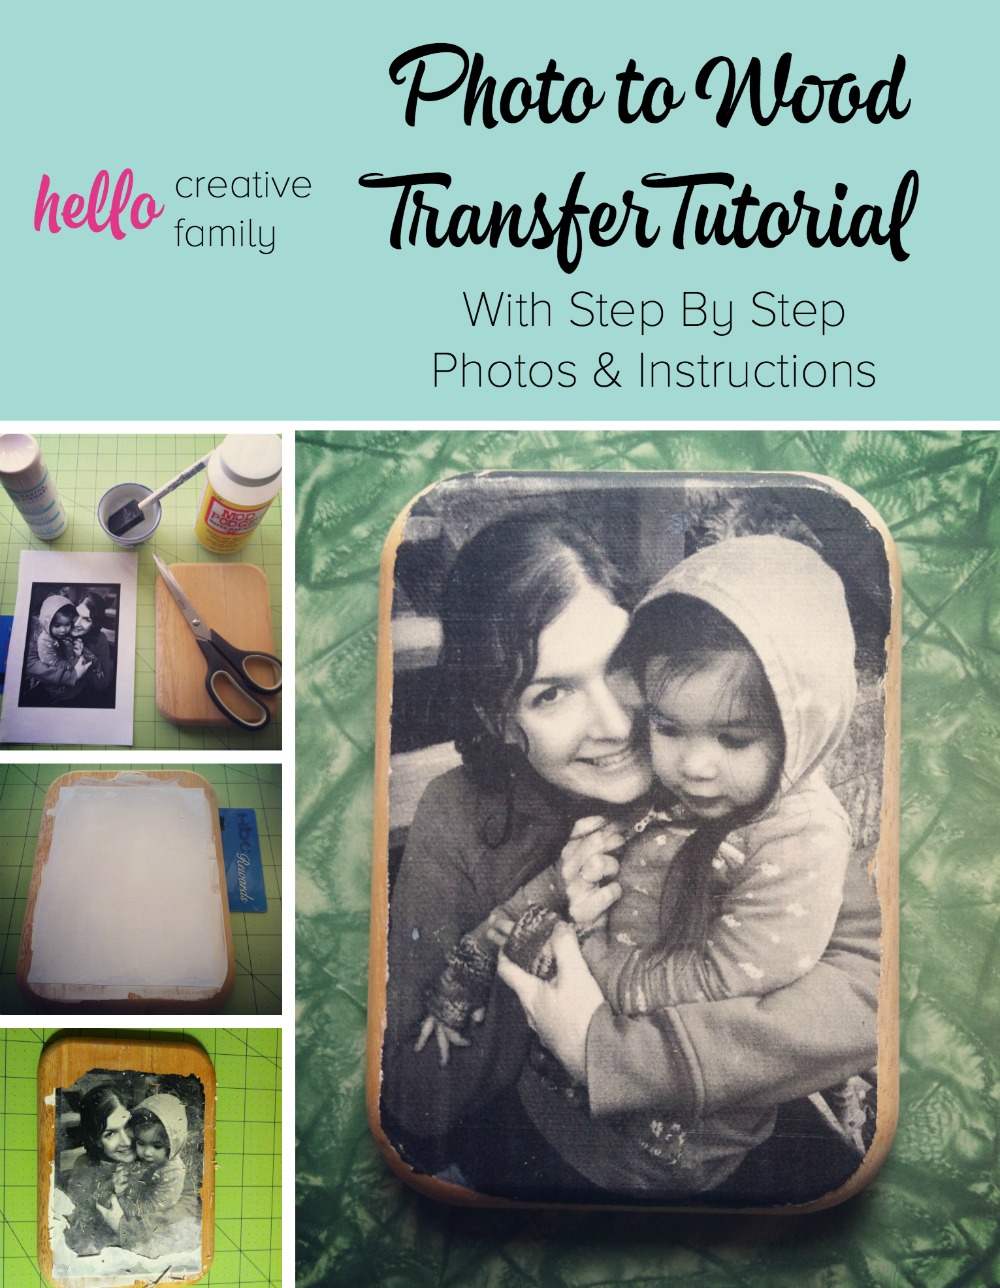 Create a one of a kind gift with this Photo to Wood Transfer Tutorial. With Step By Step Photos and Instructions this tutorial will give you great results.